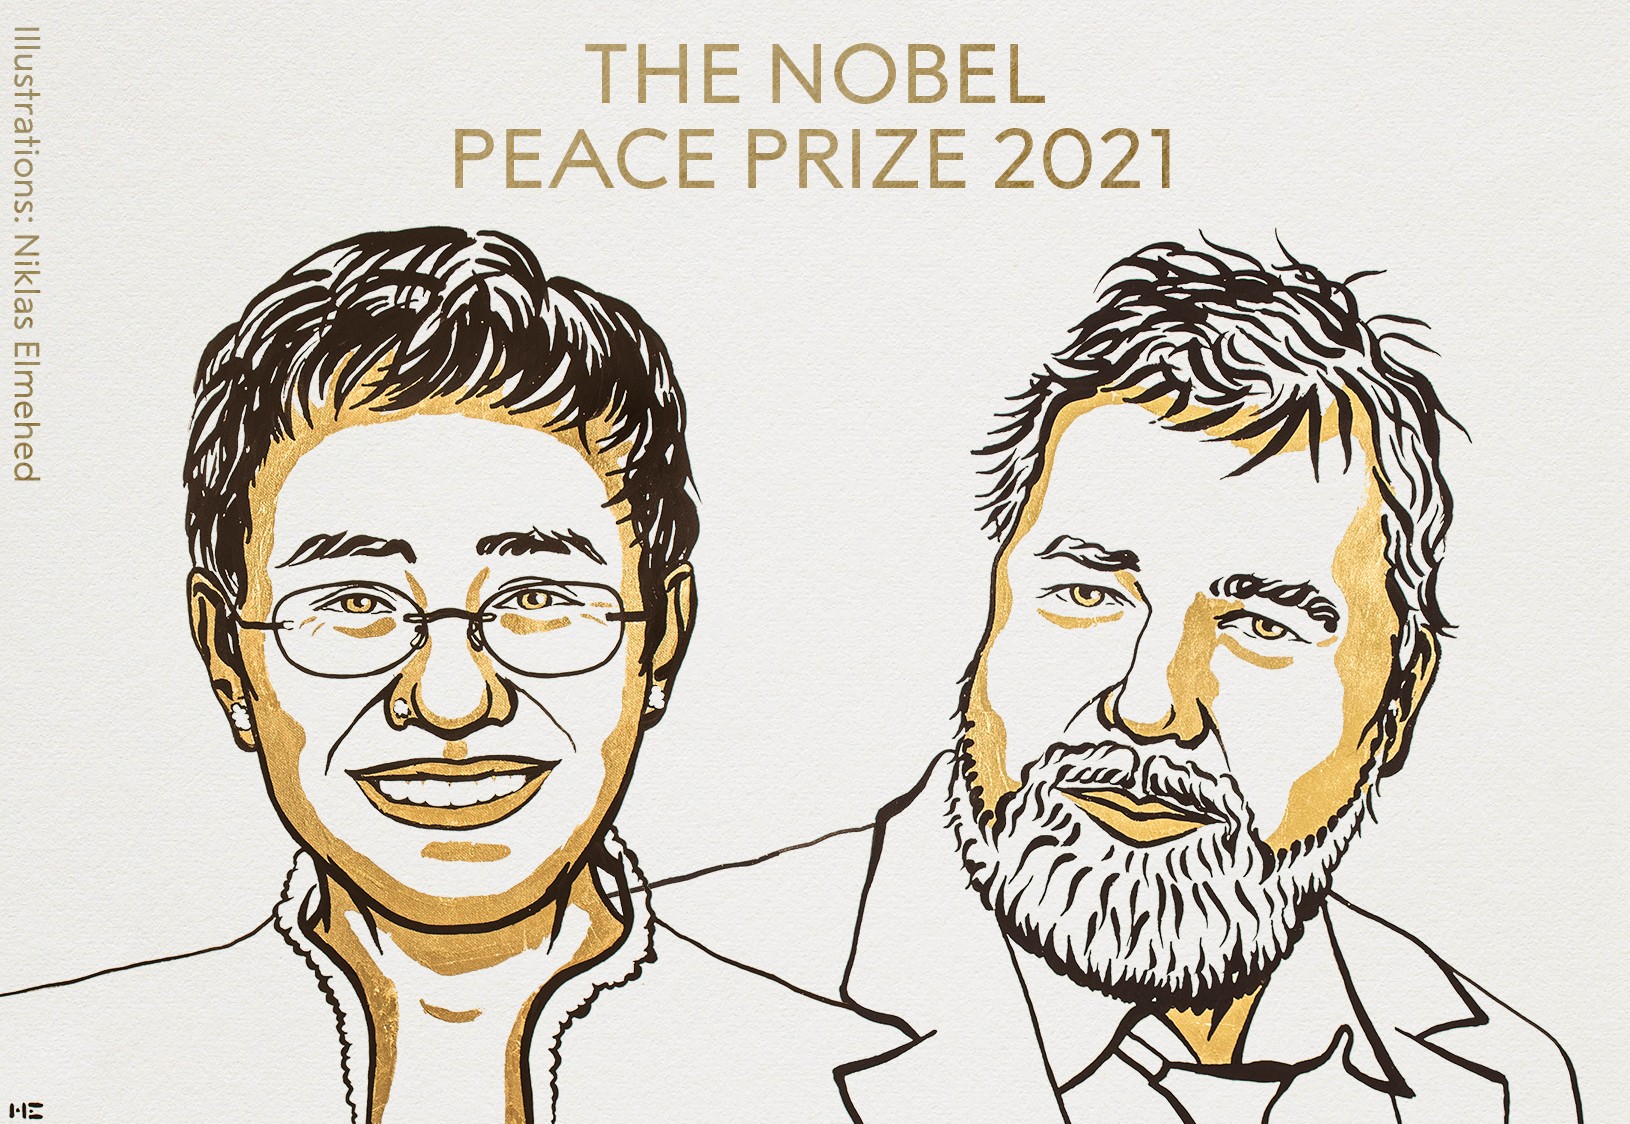 Journalists from Philippines, Russia bag Nobel Peace Prize